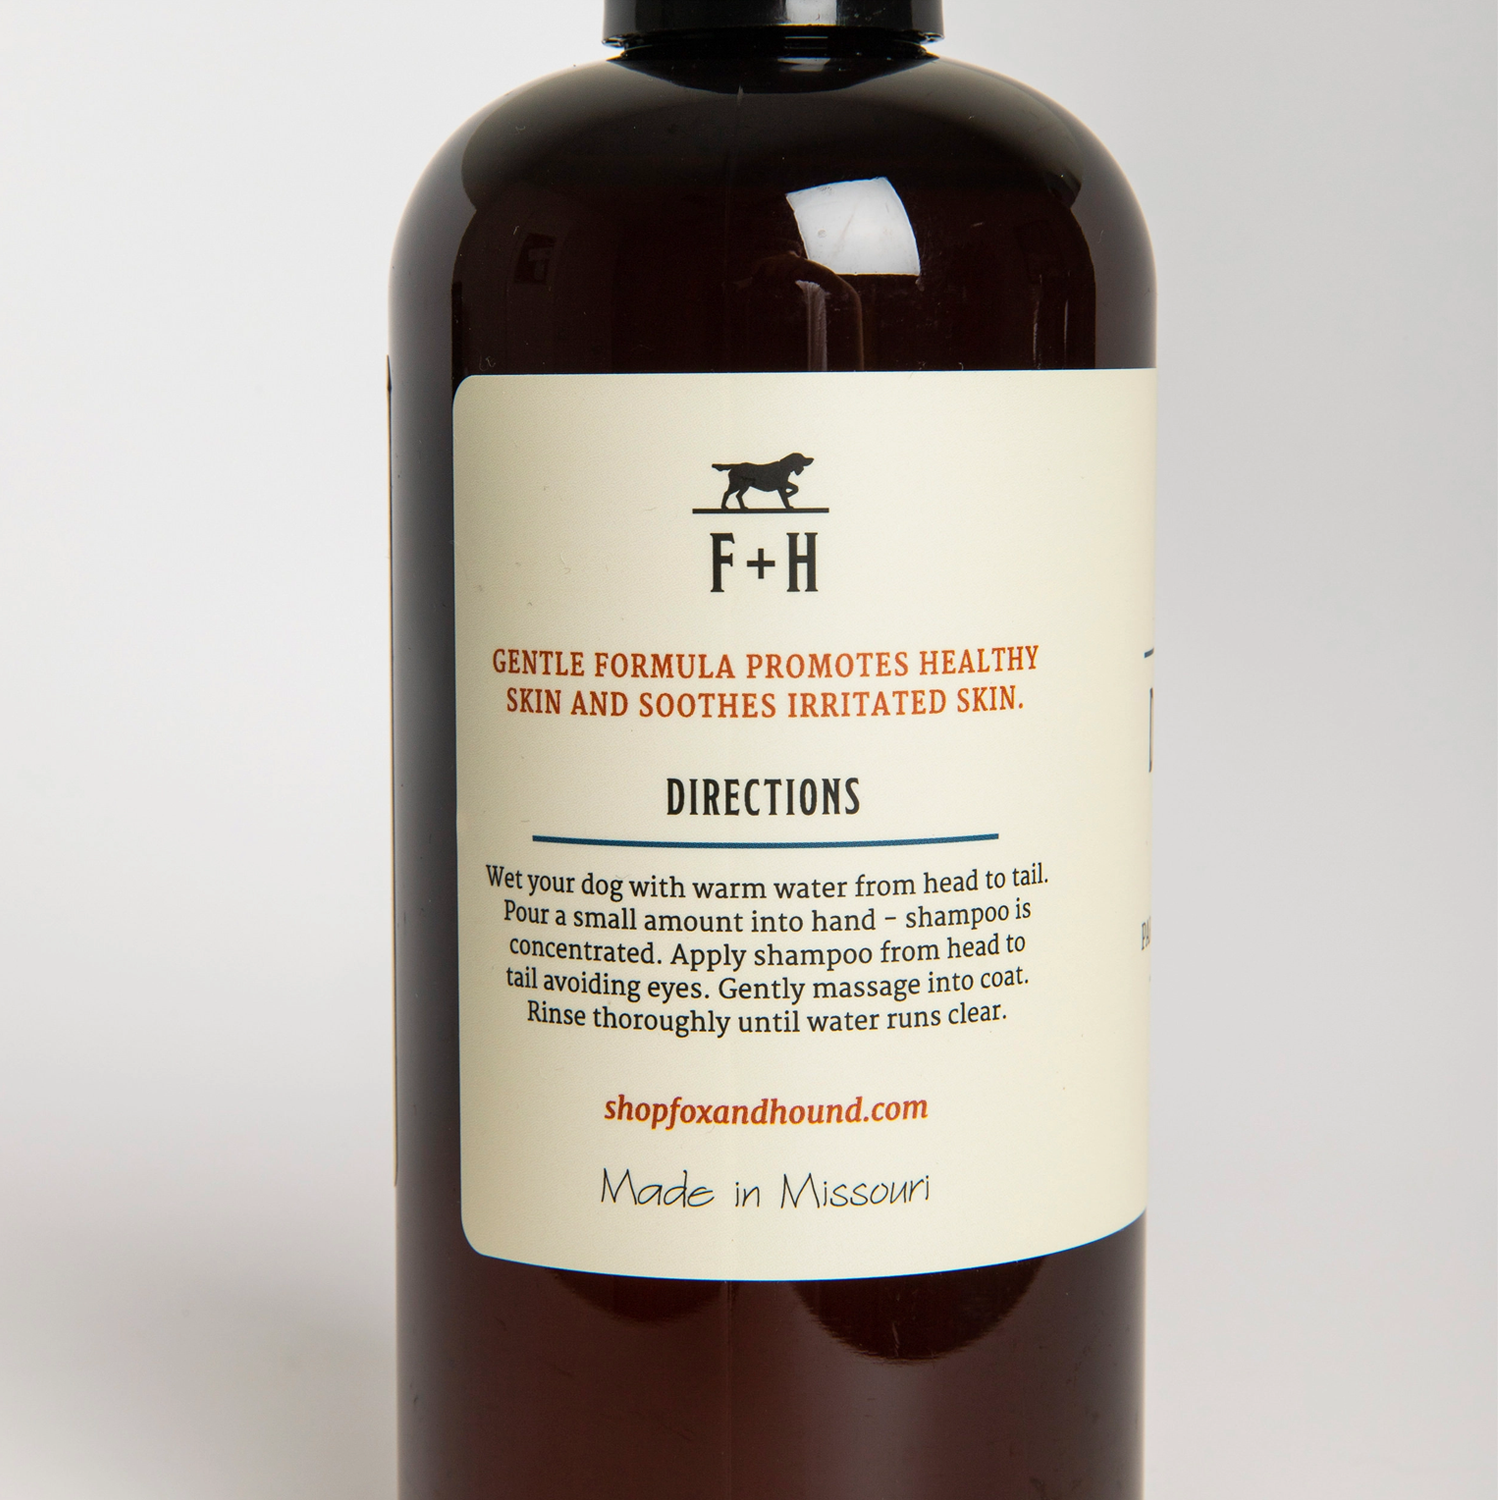 Pet Boutique - Dog Grooming - Bath and Body - Dog Shampoo + Conditioner: Argan & Amber by Fox + Hound